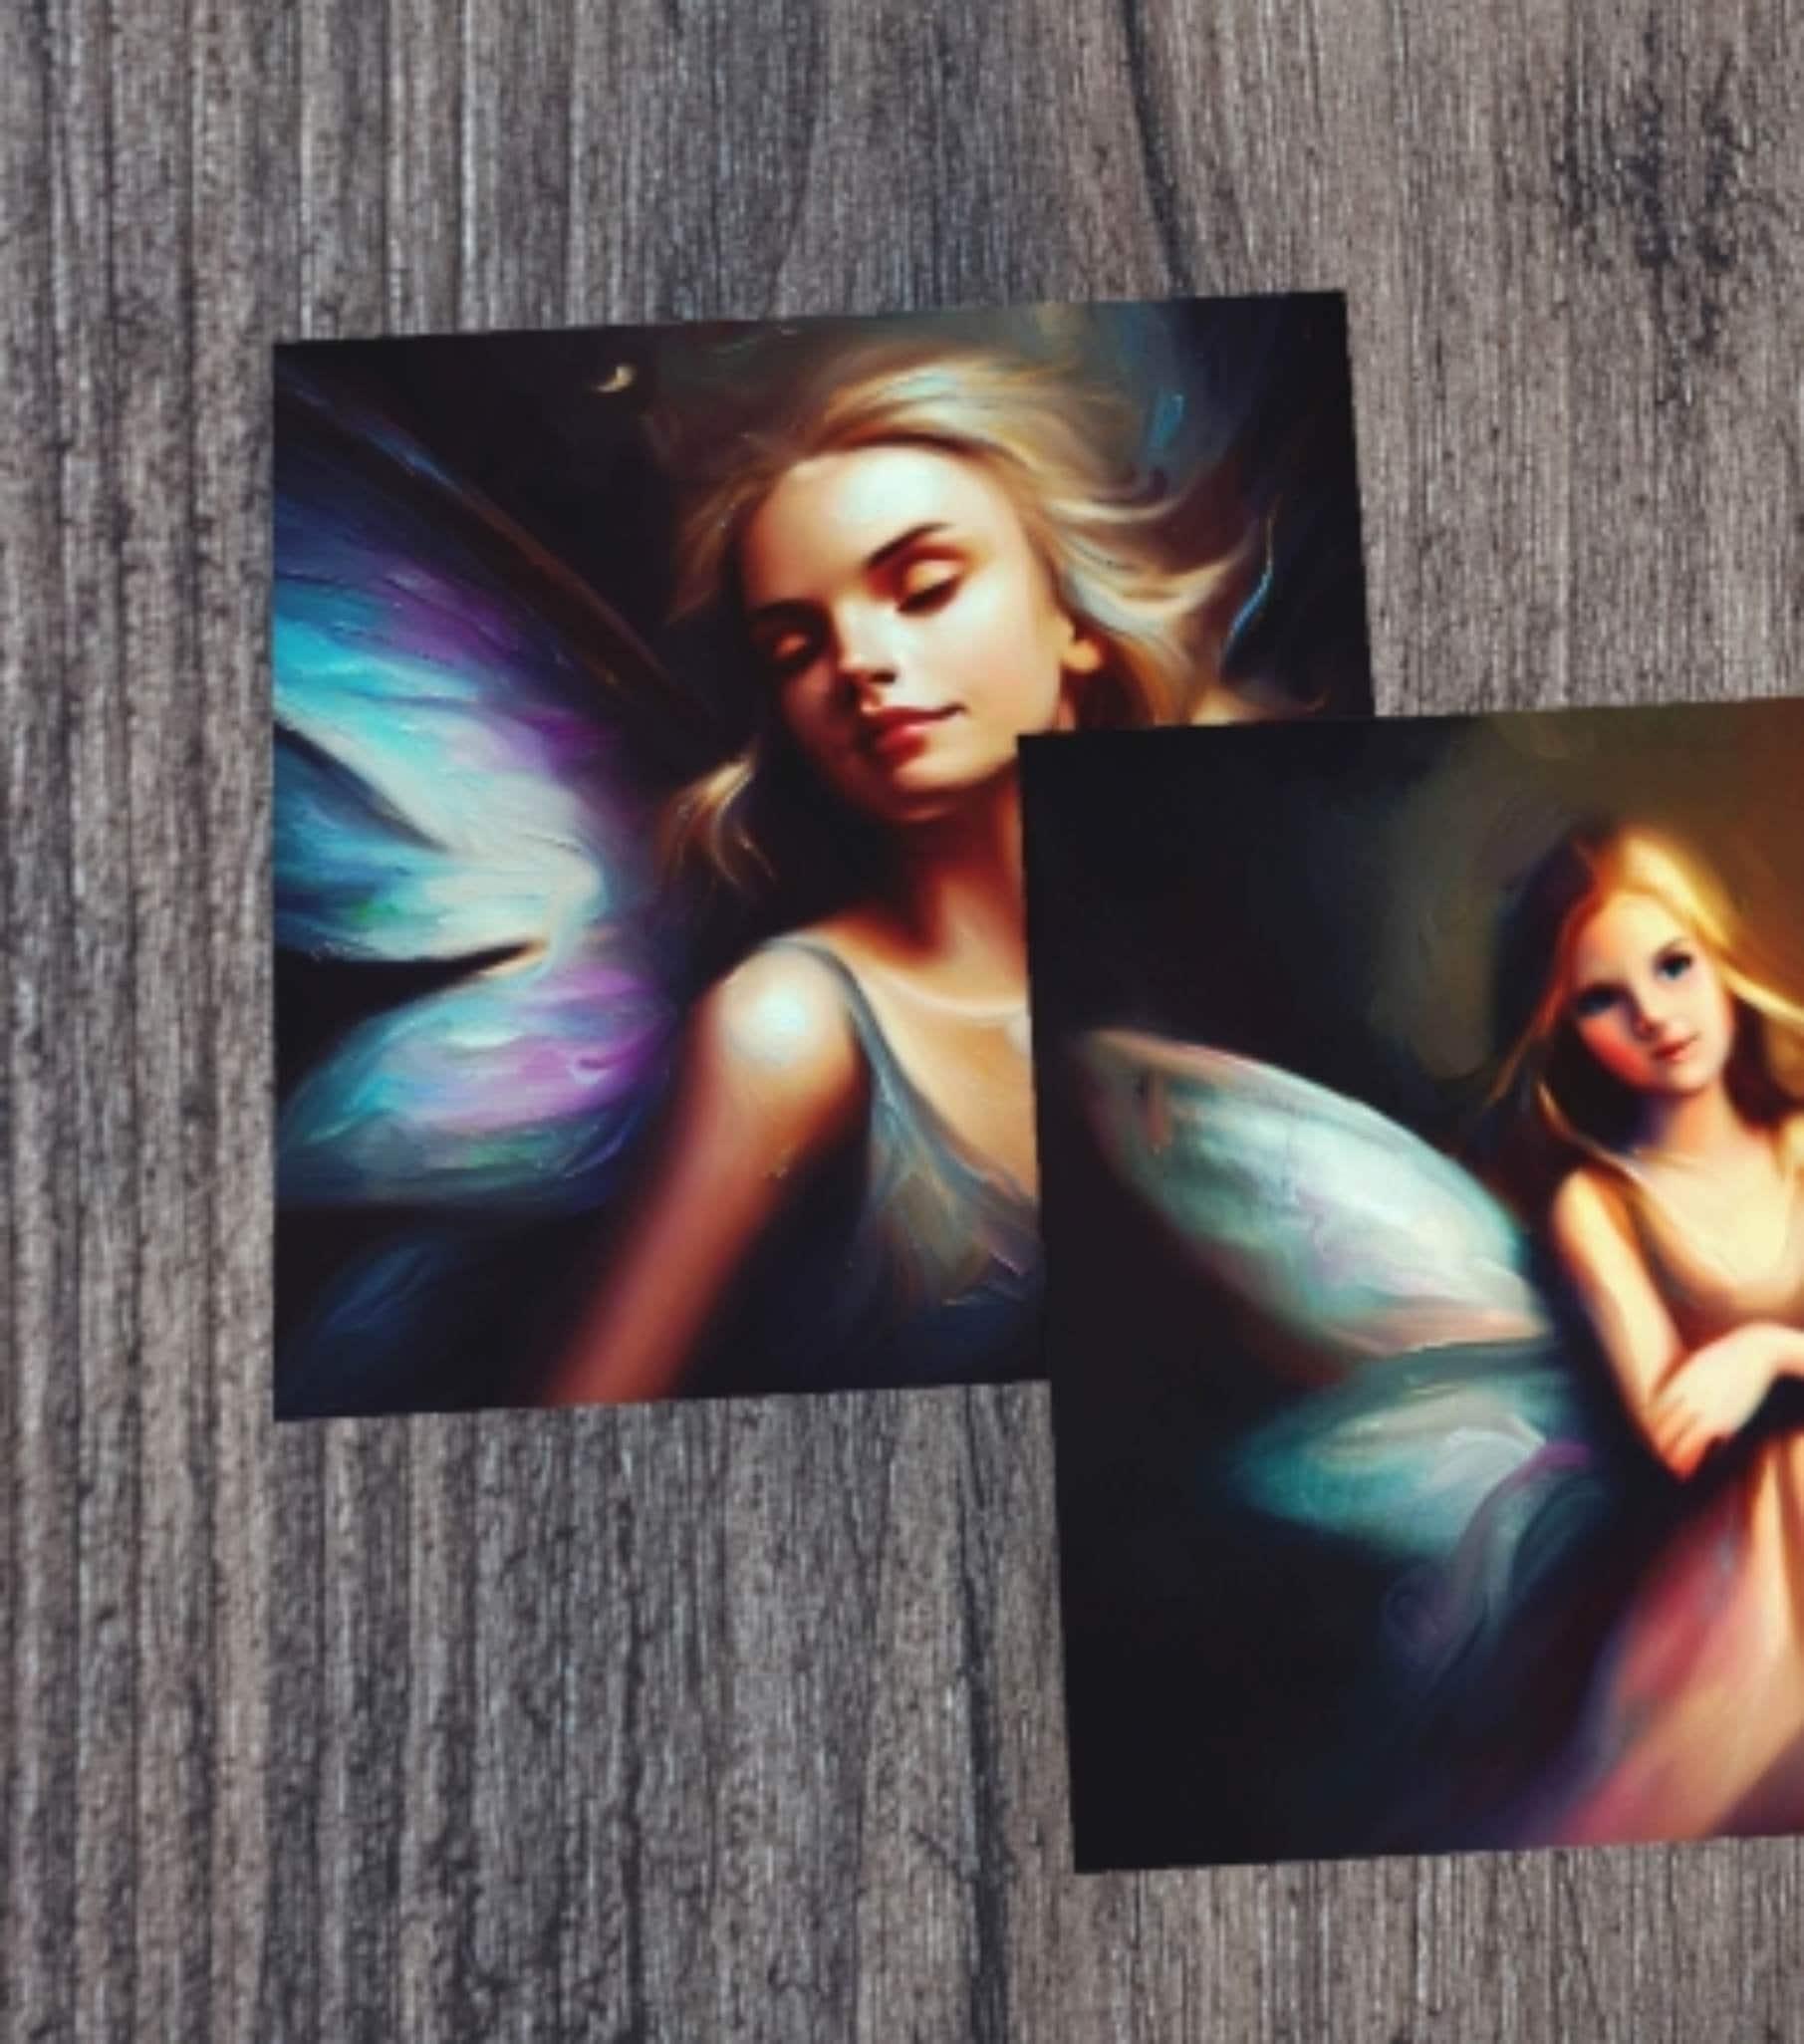 Fairy Greeting Cards, Set of 2 Designs, Bulk Pack of Cards